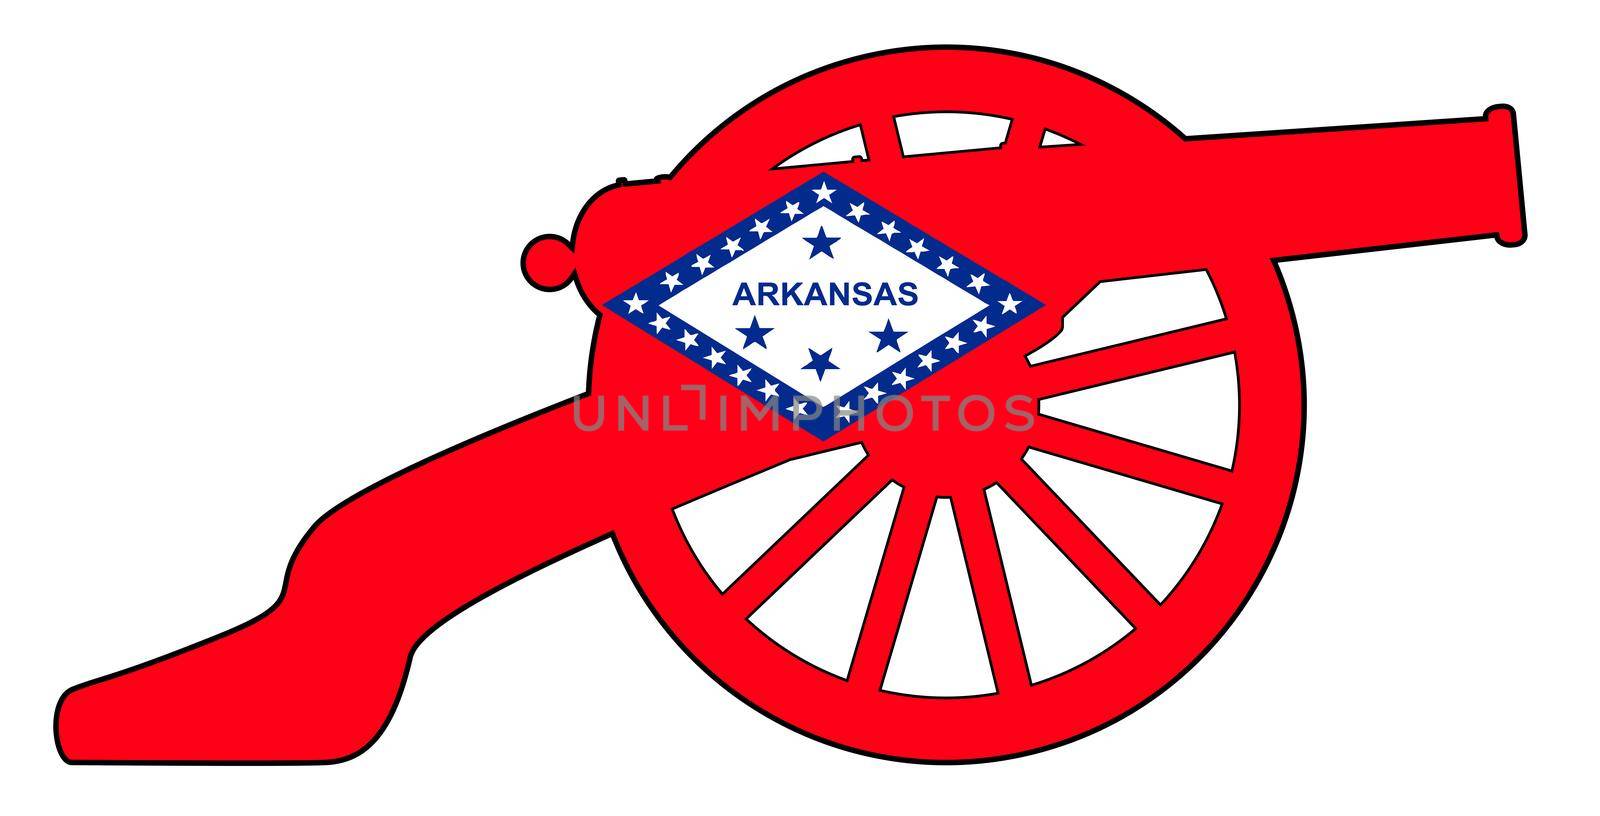 Typical American civil war cannon gun with Arkansas state flag isolated on a white background